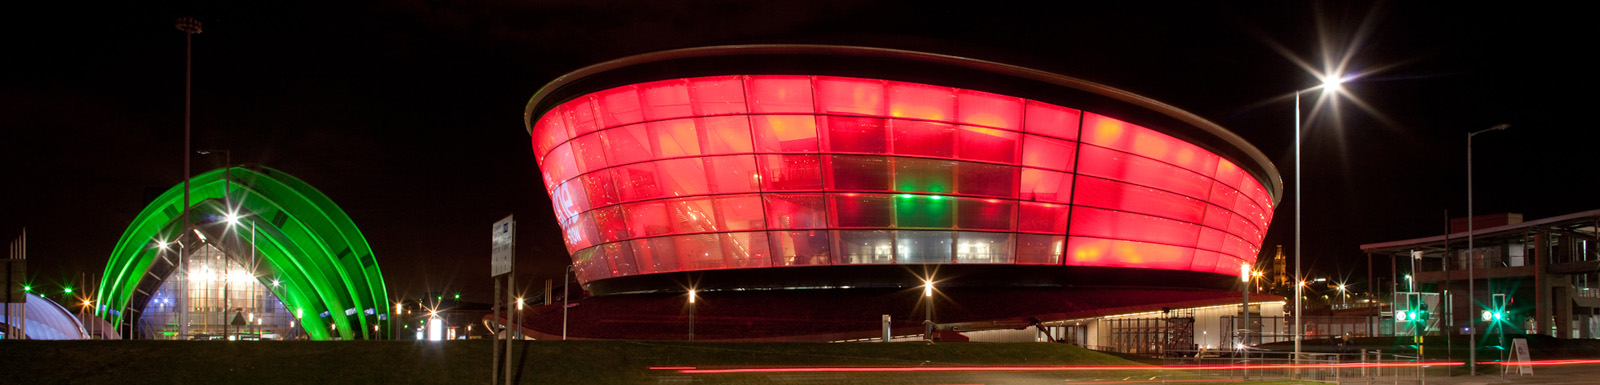 The Clyde Auditorium and SSE Hydro